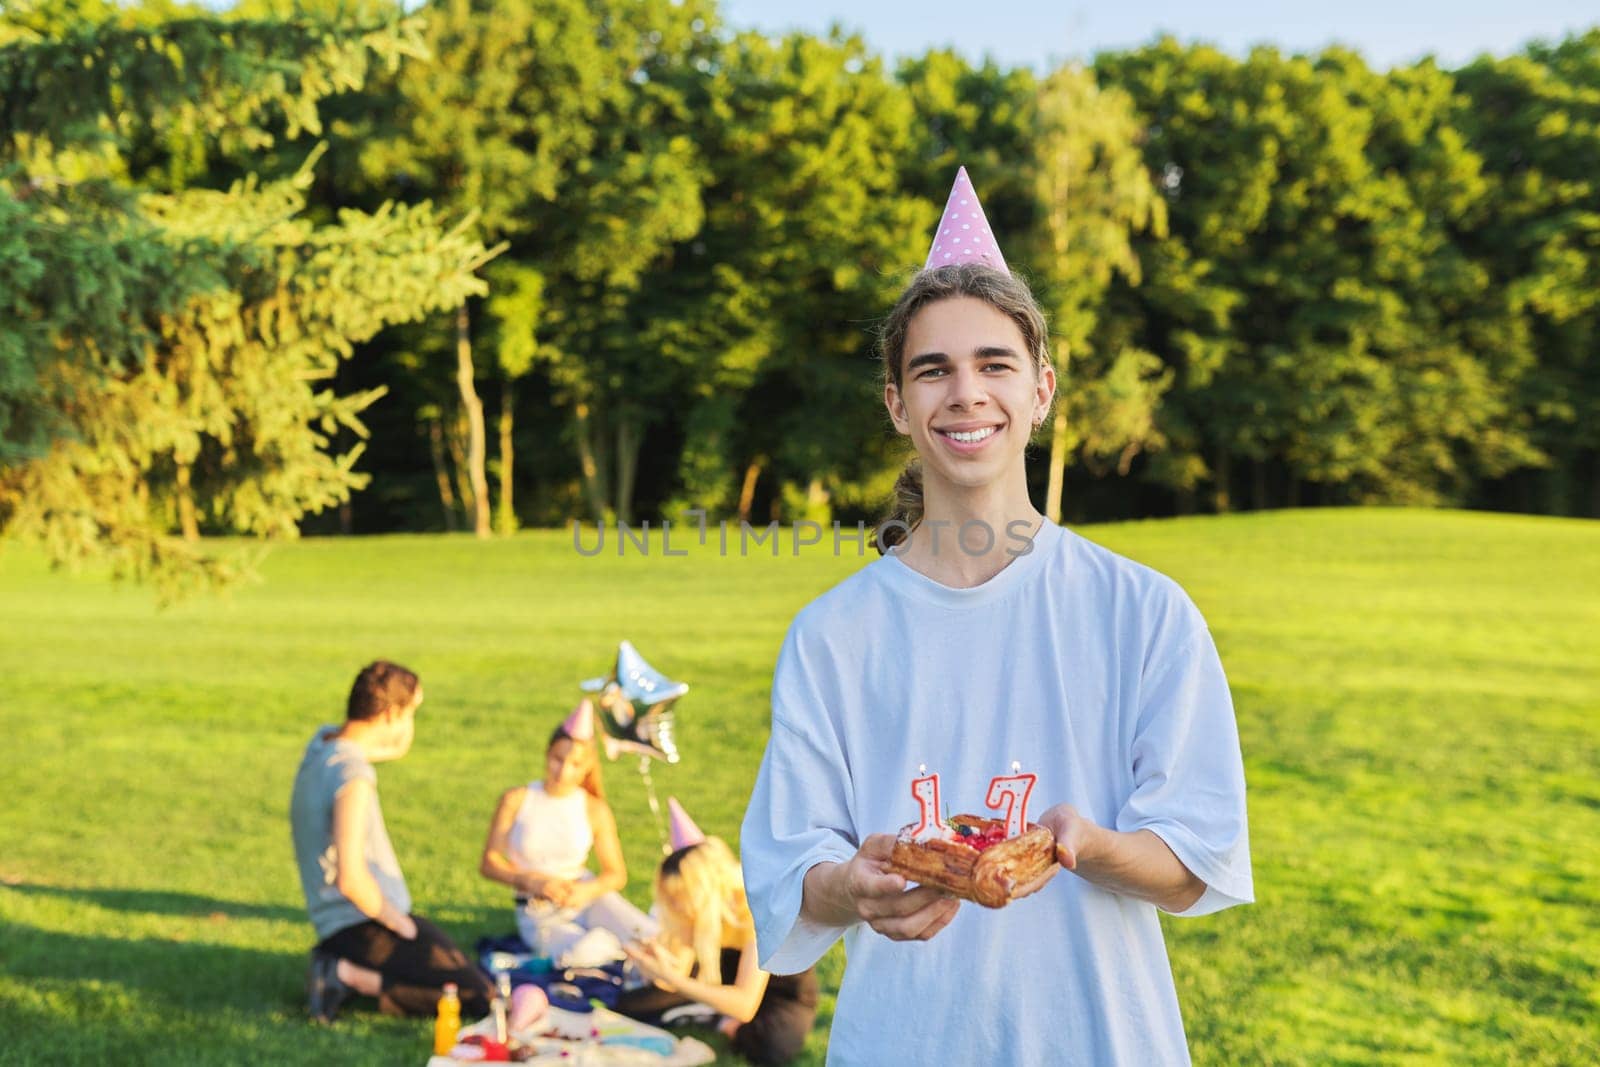 Happy guy teenager in birthday hat with cake with candles 17. Outdoor picnic party with friends in park on grass. Adolescence, having fun, holiday, celebration, birthday, age concept